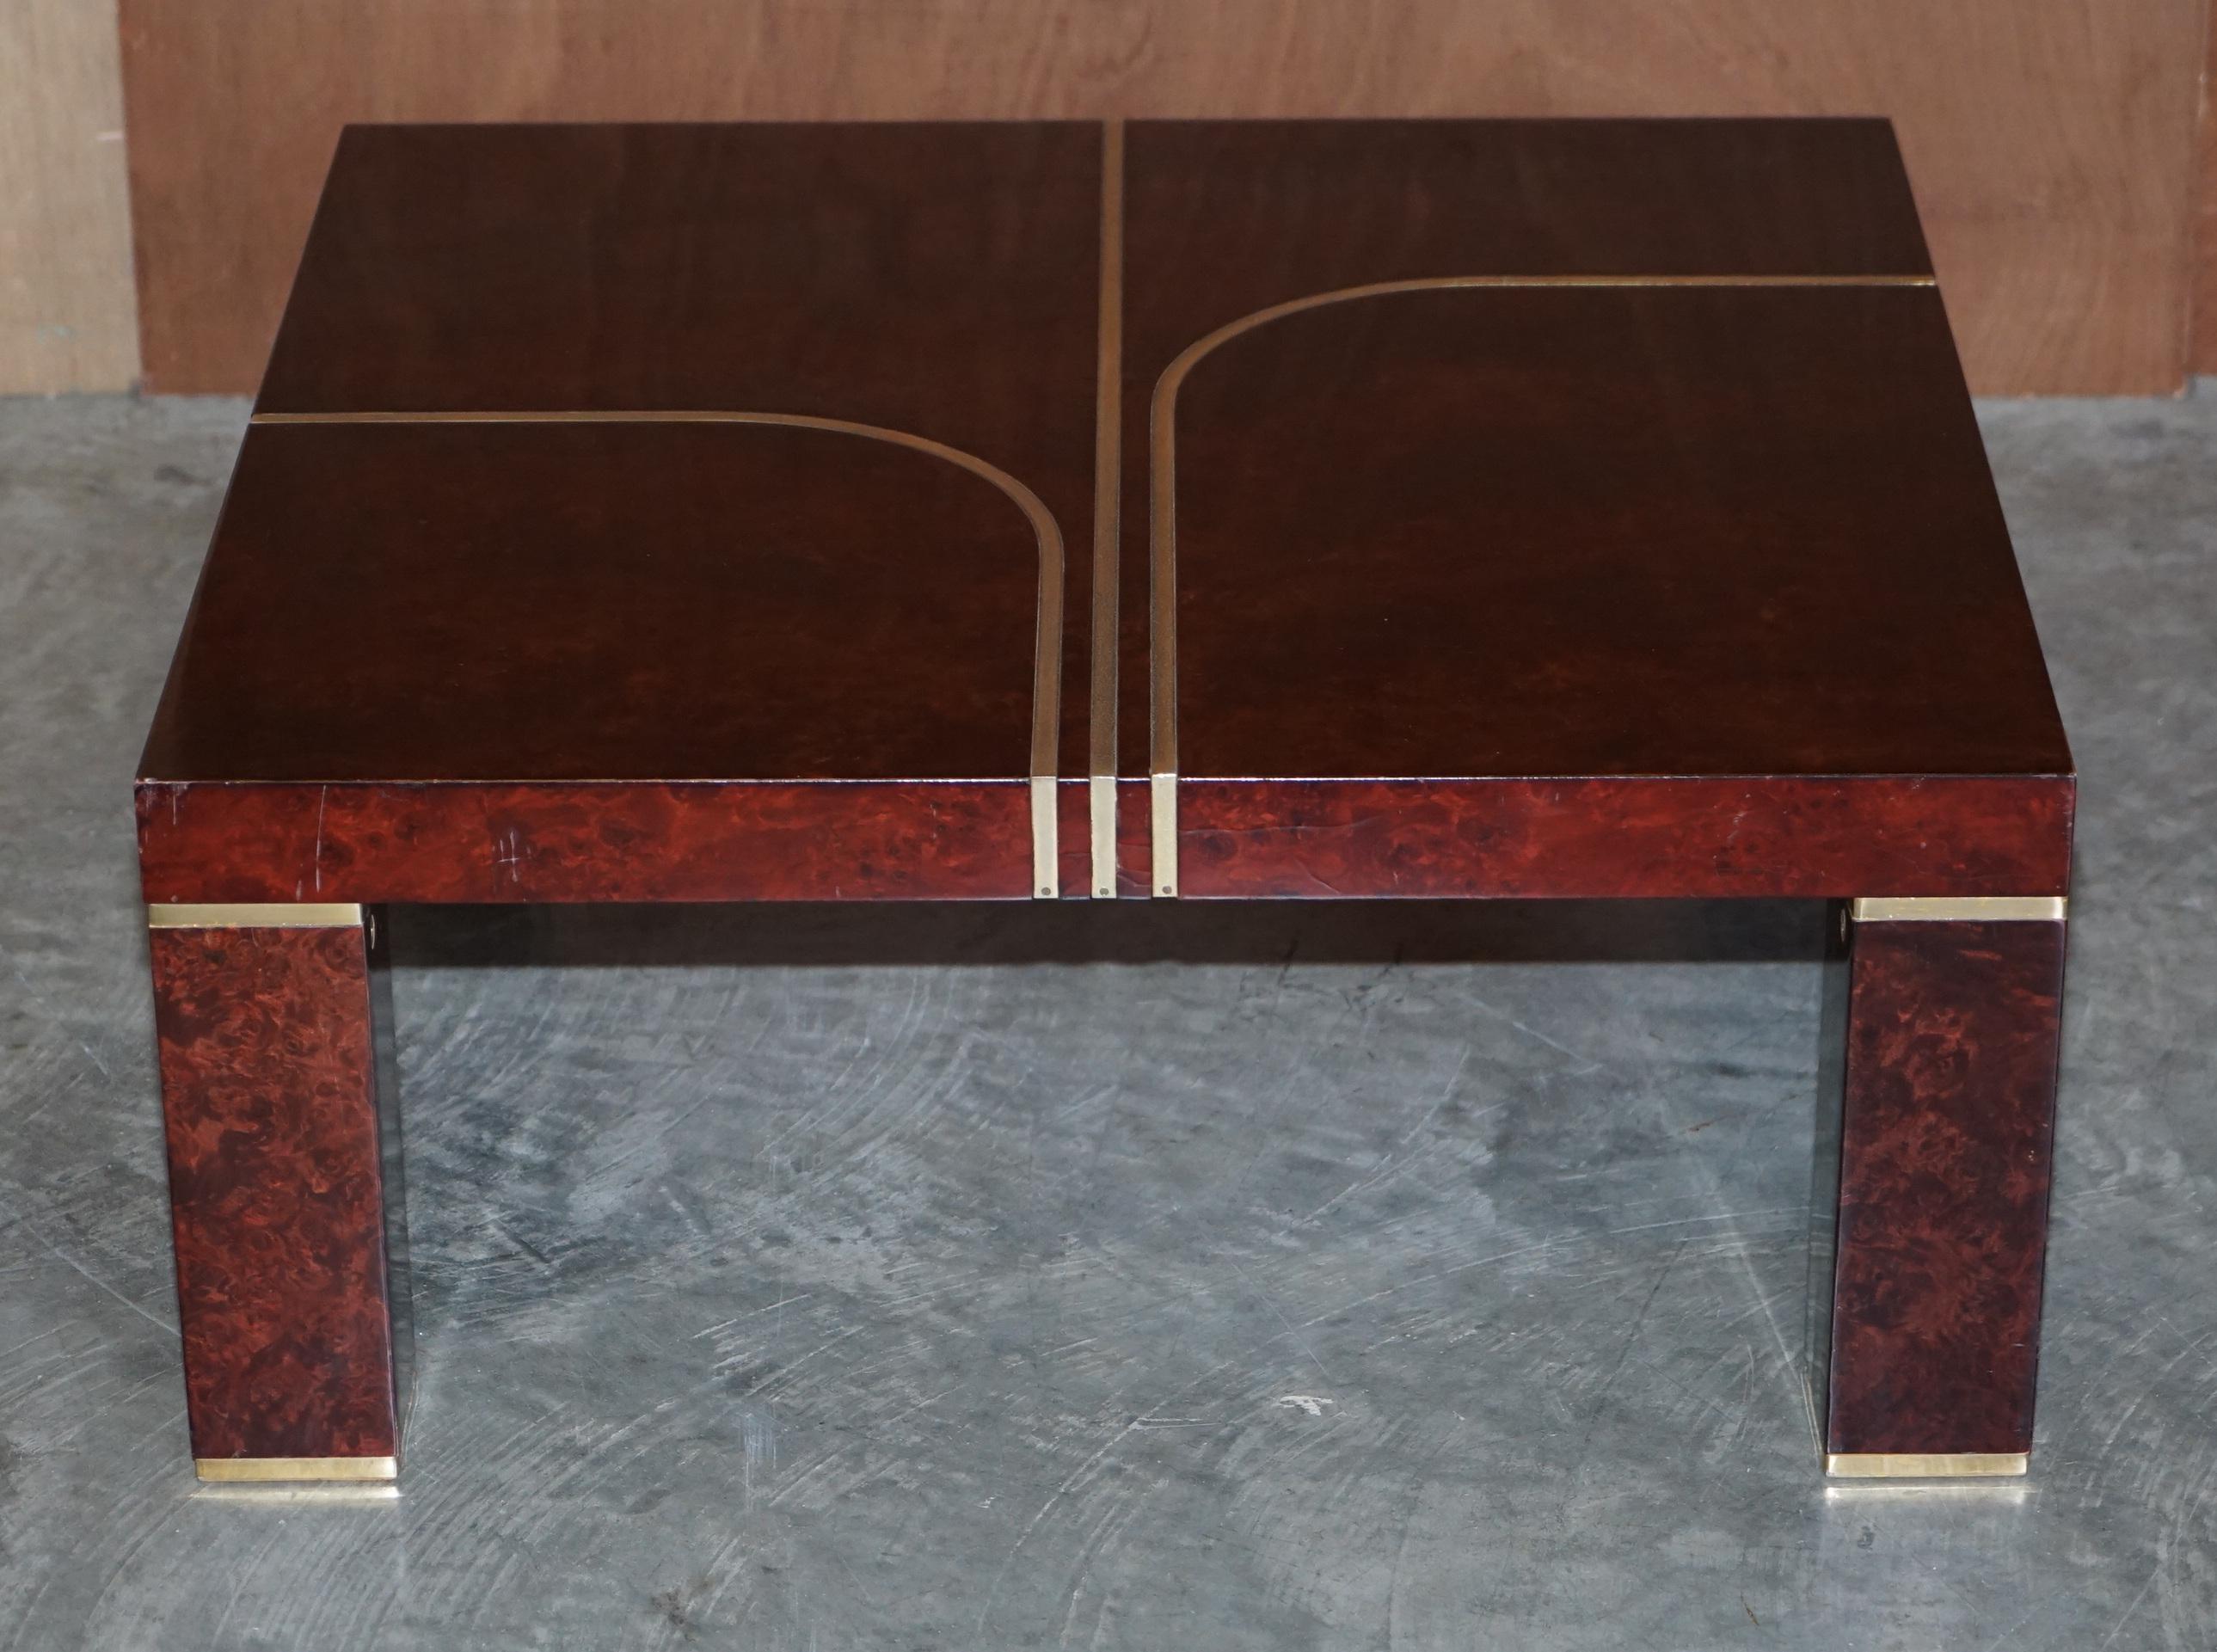 We are delighted to offer for sale this Contemporary Art Modern Burr walnut & brass inlaid coffee table

This is truly a stunning piece, the brass accents really compliment the burr & burl walnut finish, it is a very decorative table

I have